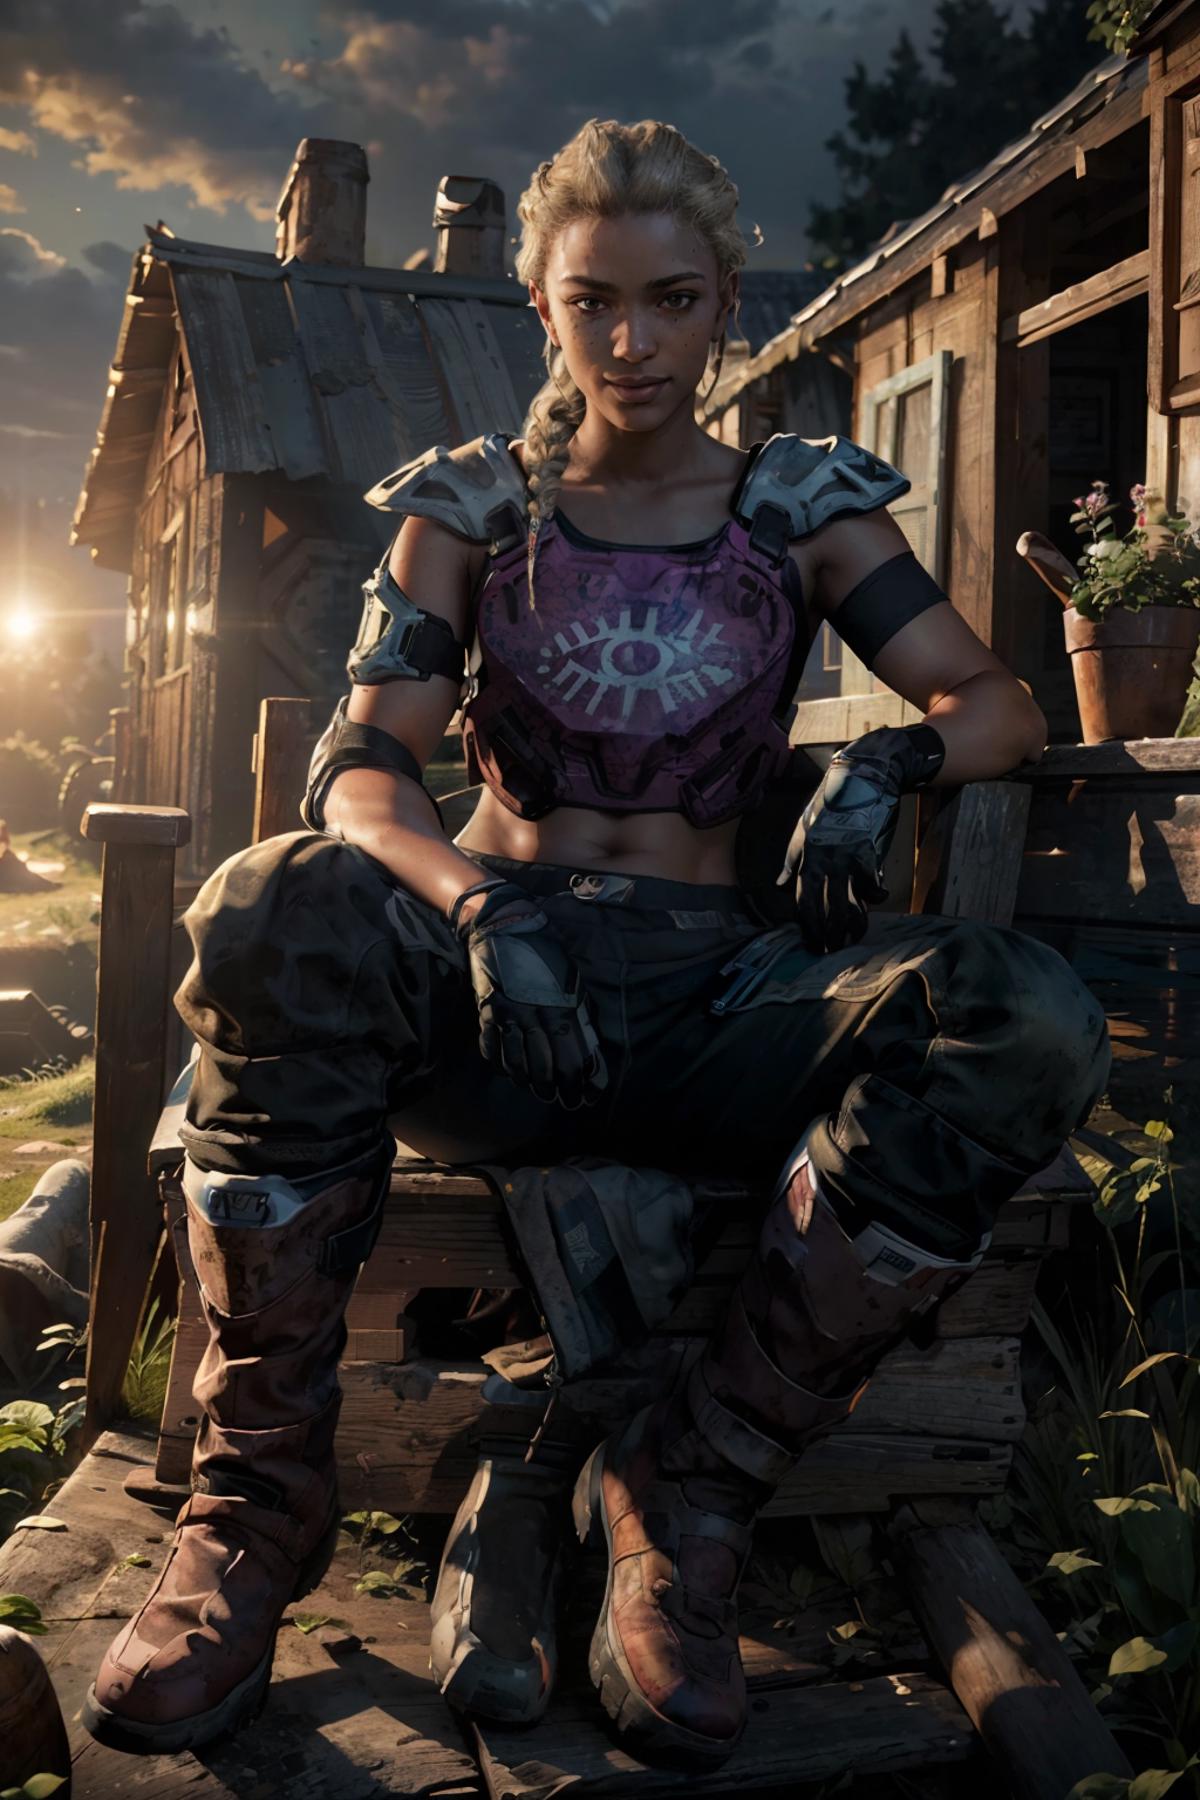 Lou from Far Cry New Dawn image by wikkitikki